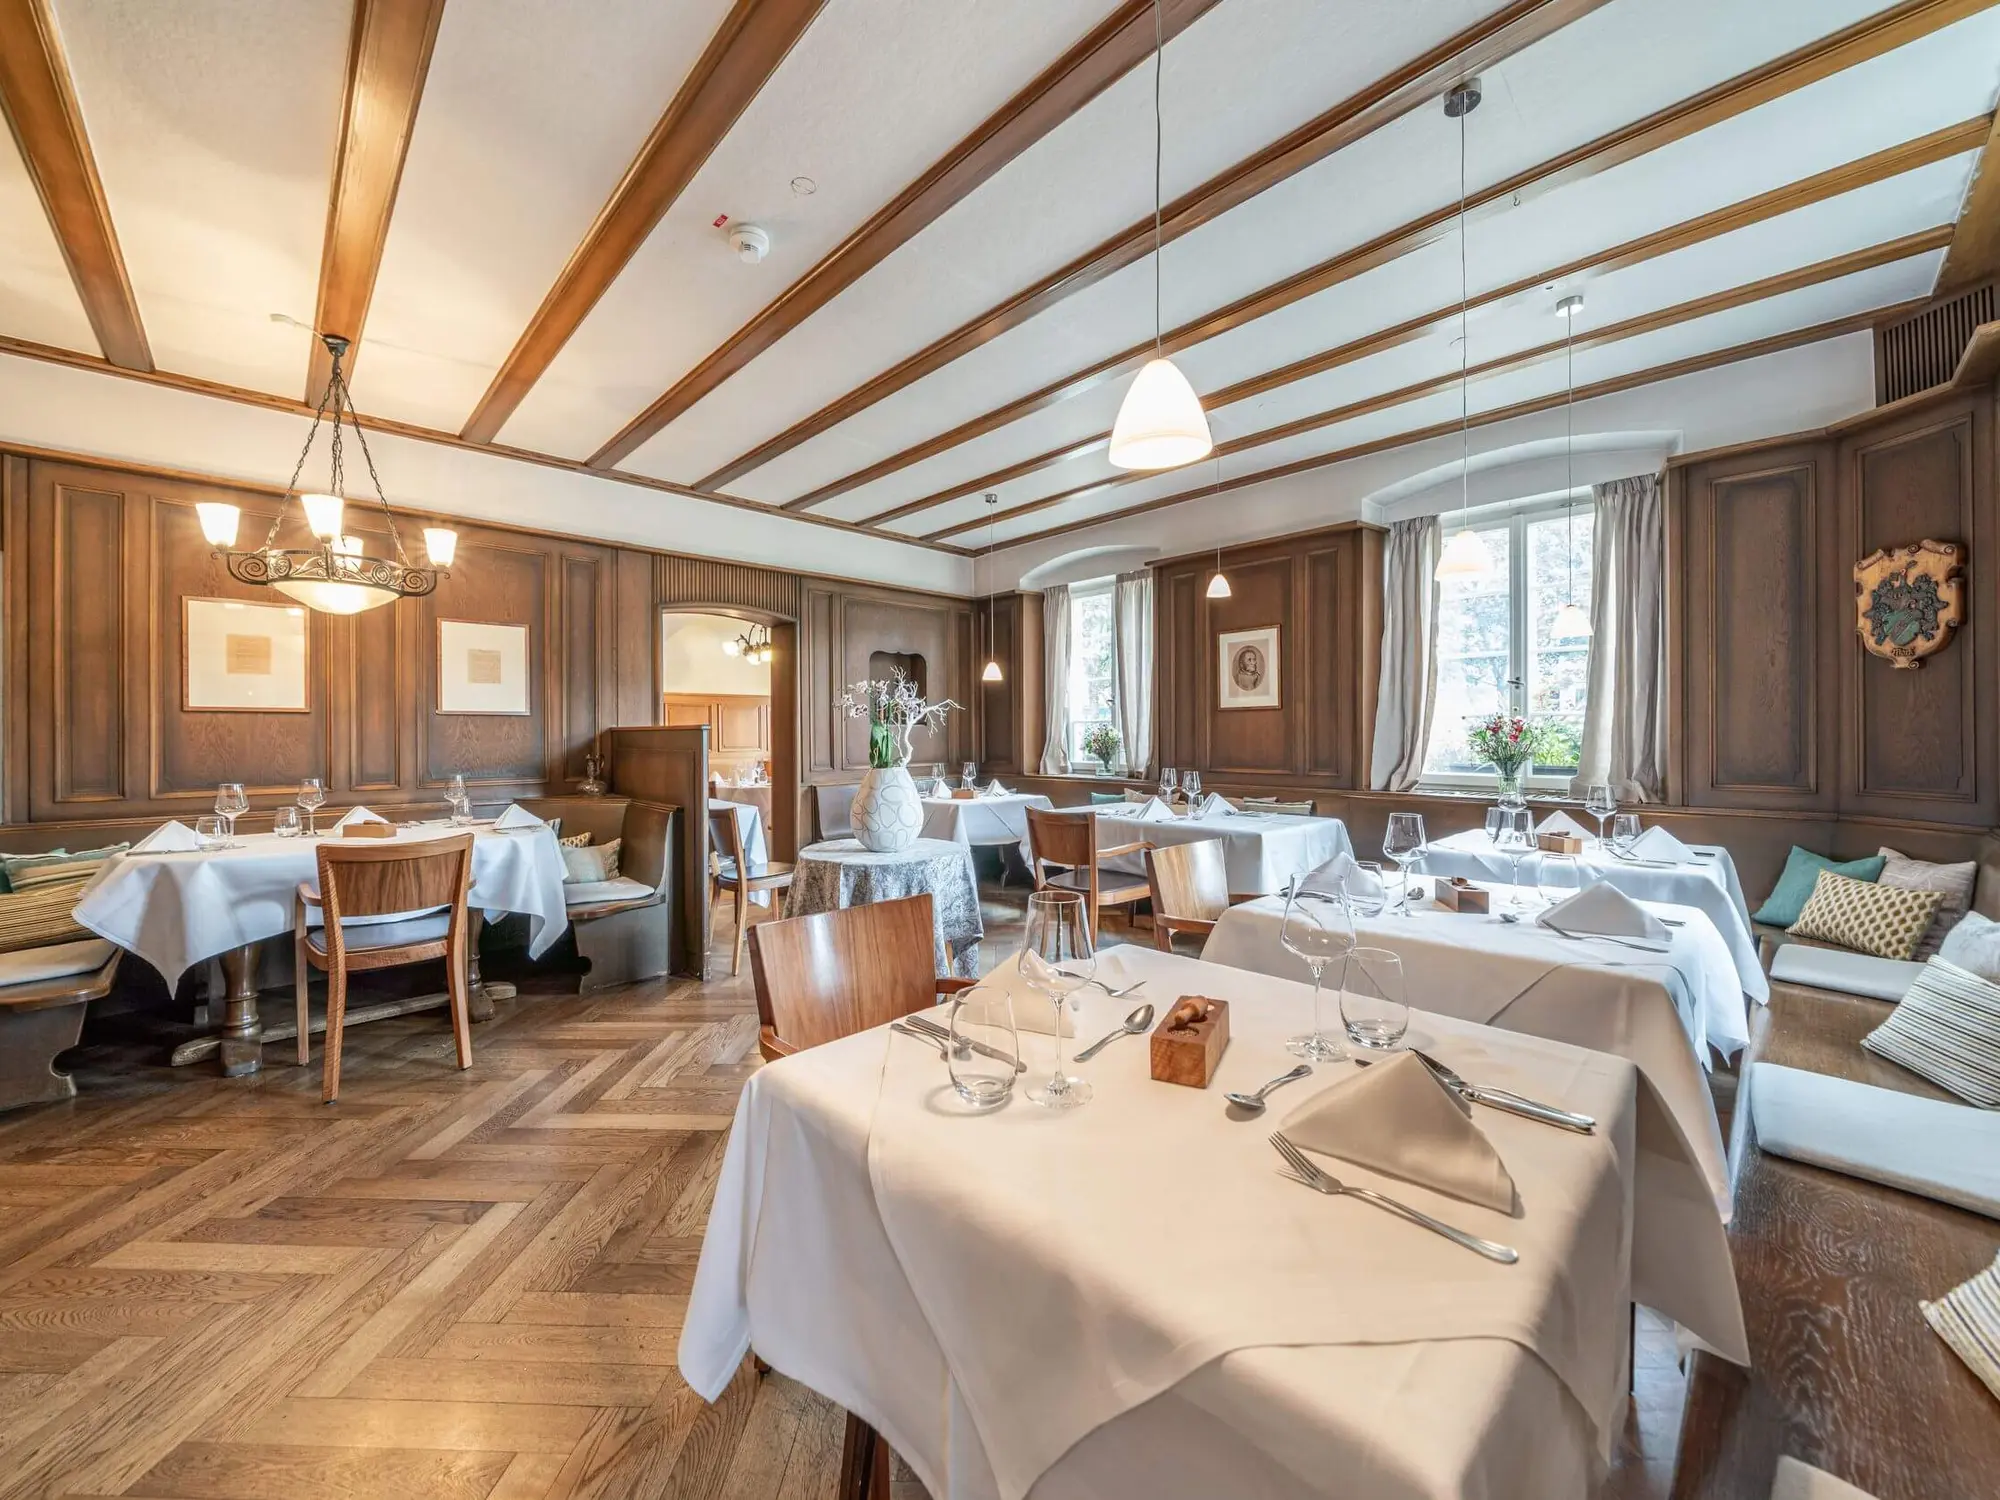 Restaurant in the traditional Hotel Alte Post in Müllheim, Black Forest (c) Photo Alte Post